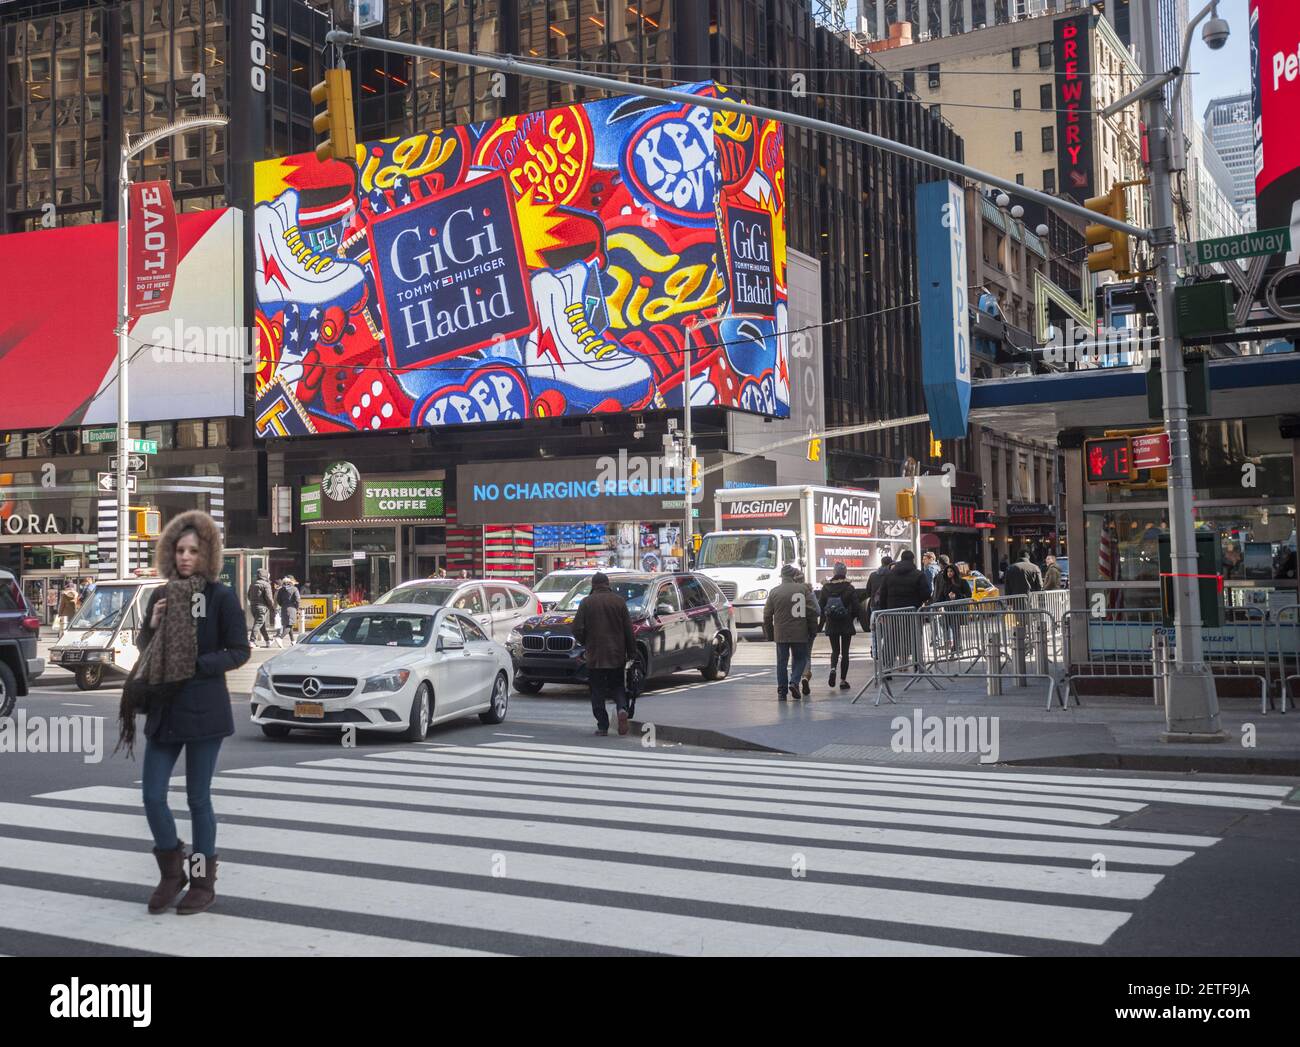 Pedestrians cross Broadway in Times Square in New York on Thursday,  February 16, 2017 in front of an advertisement for the Tommy Hilfiger/Gigi  Hadid collaboration. Hilfiger did not show at this year's